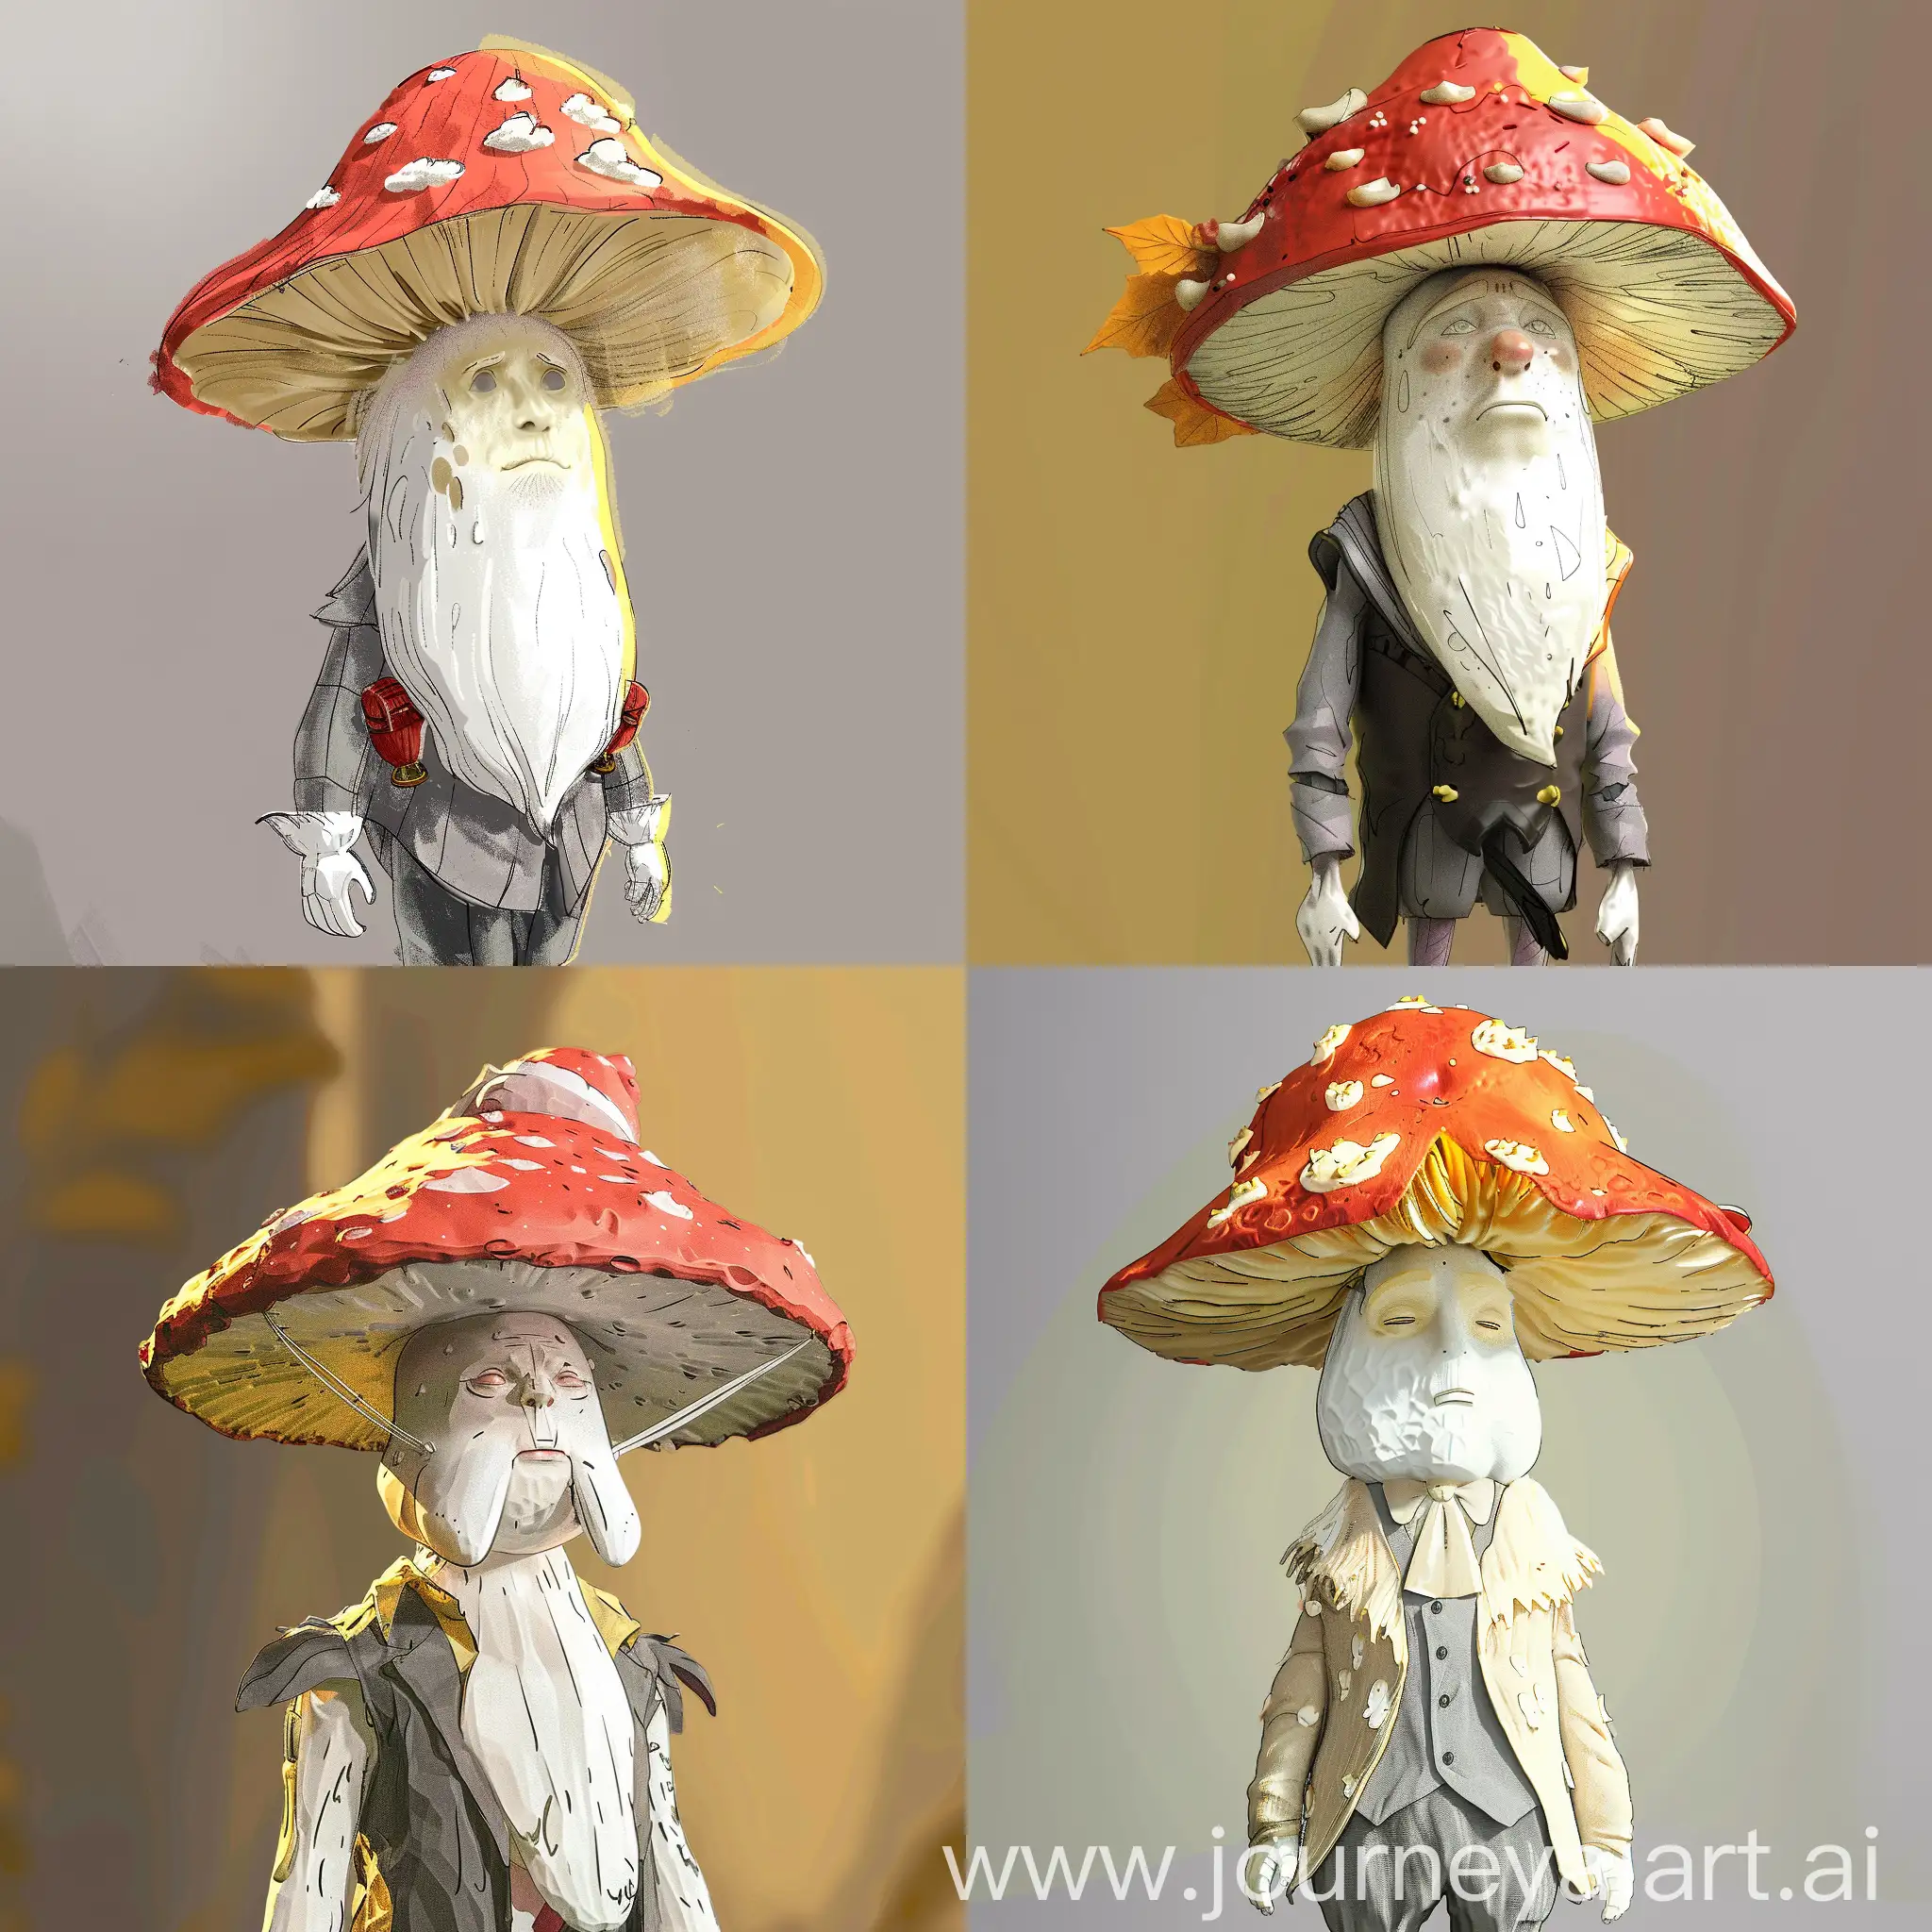 Realistic 3D League of legends style art of a humanoid mushroom with face and costume and white humita.